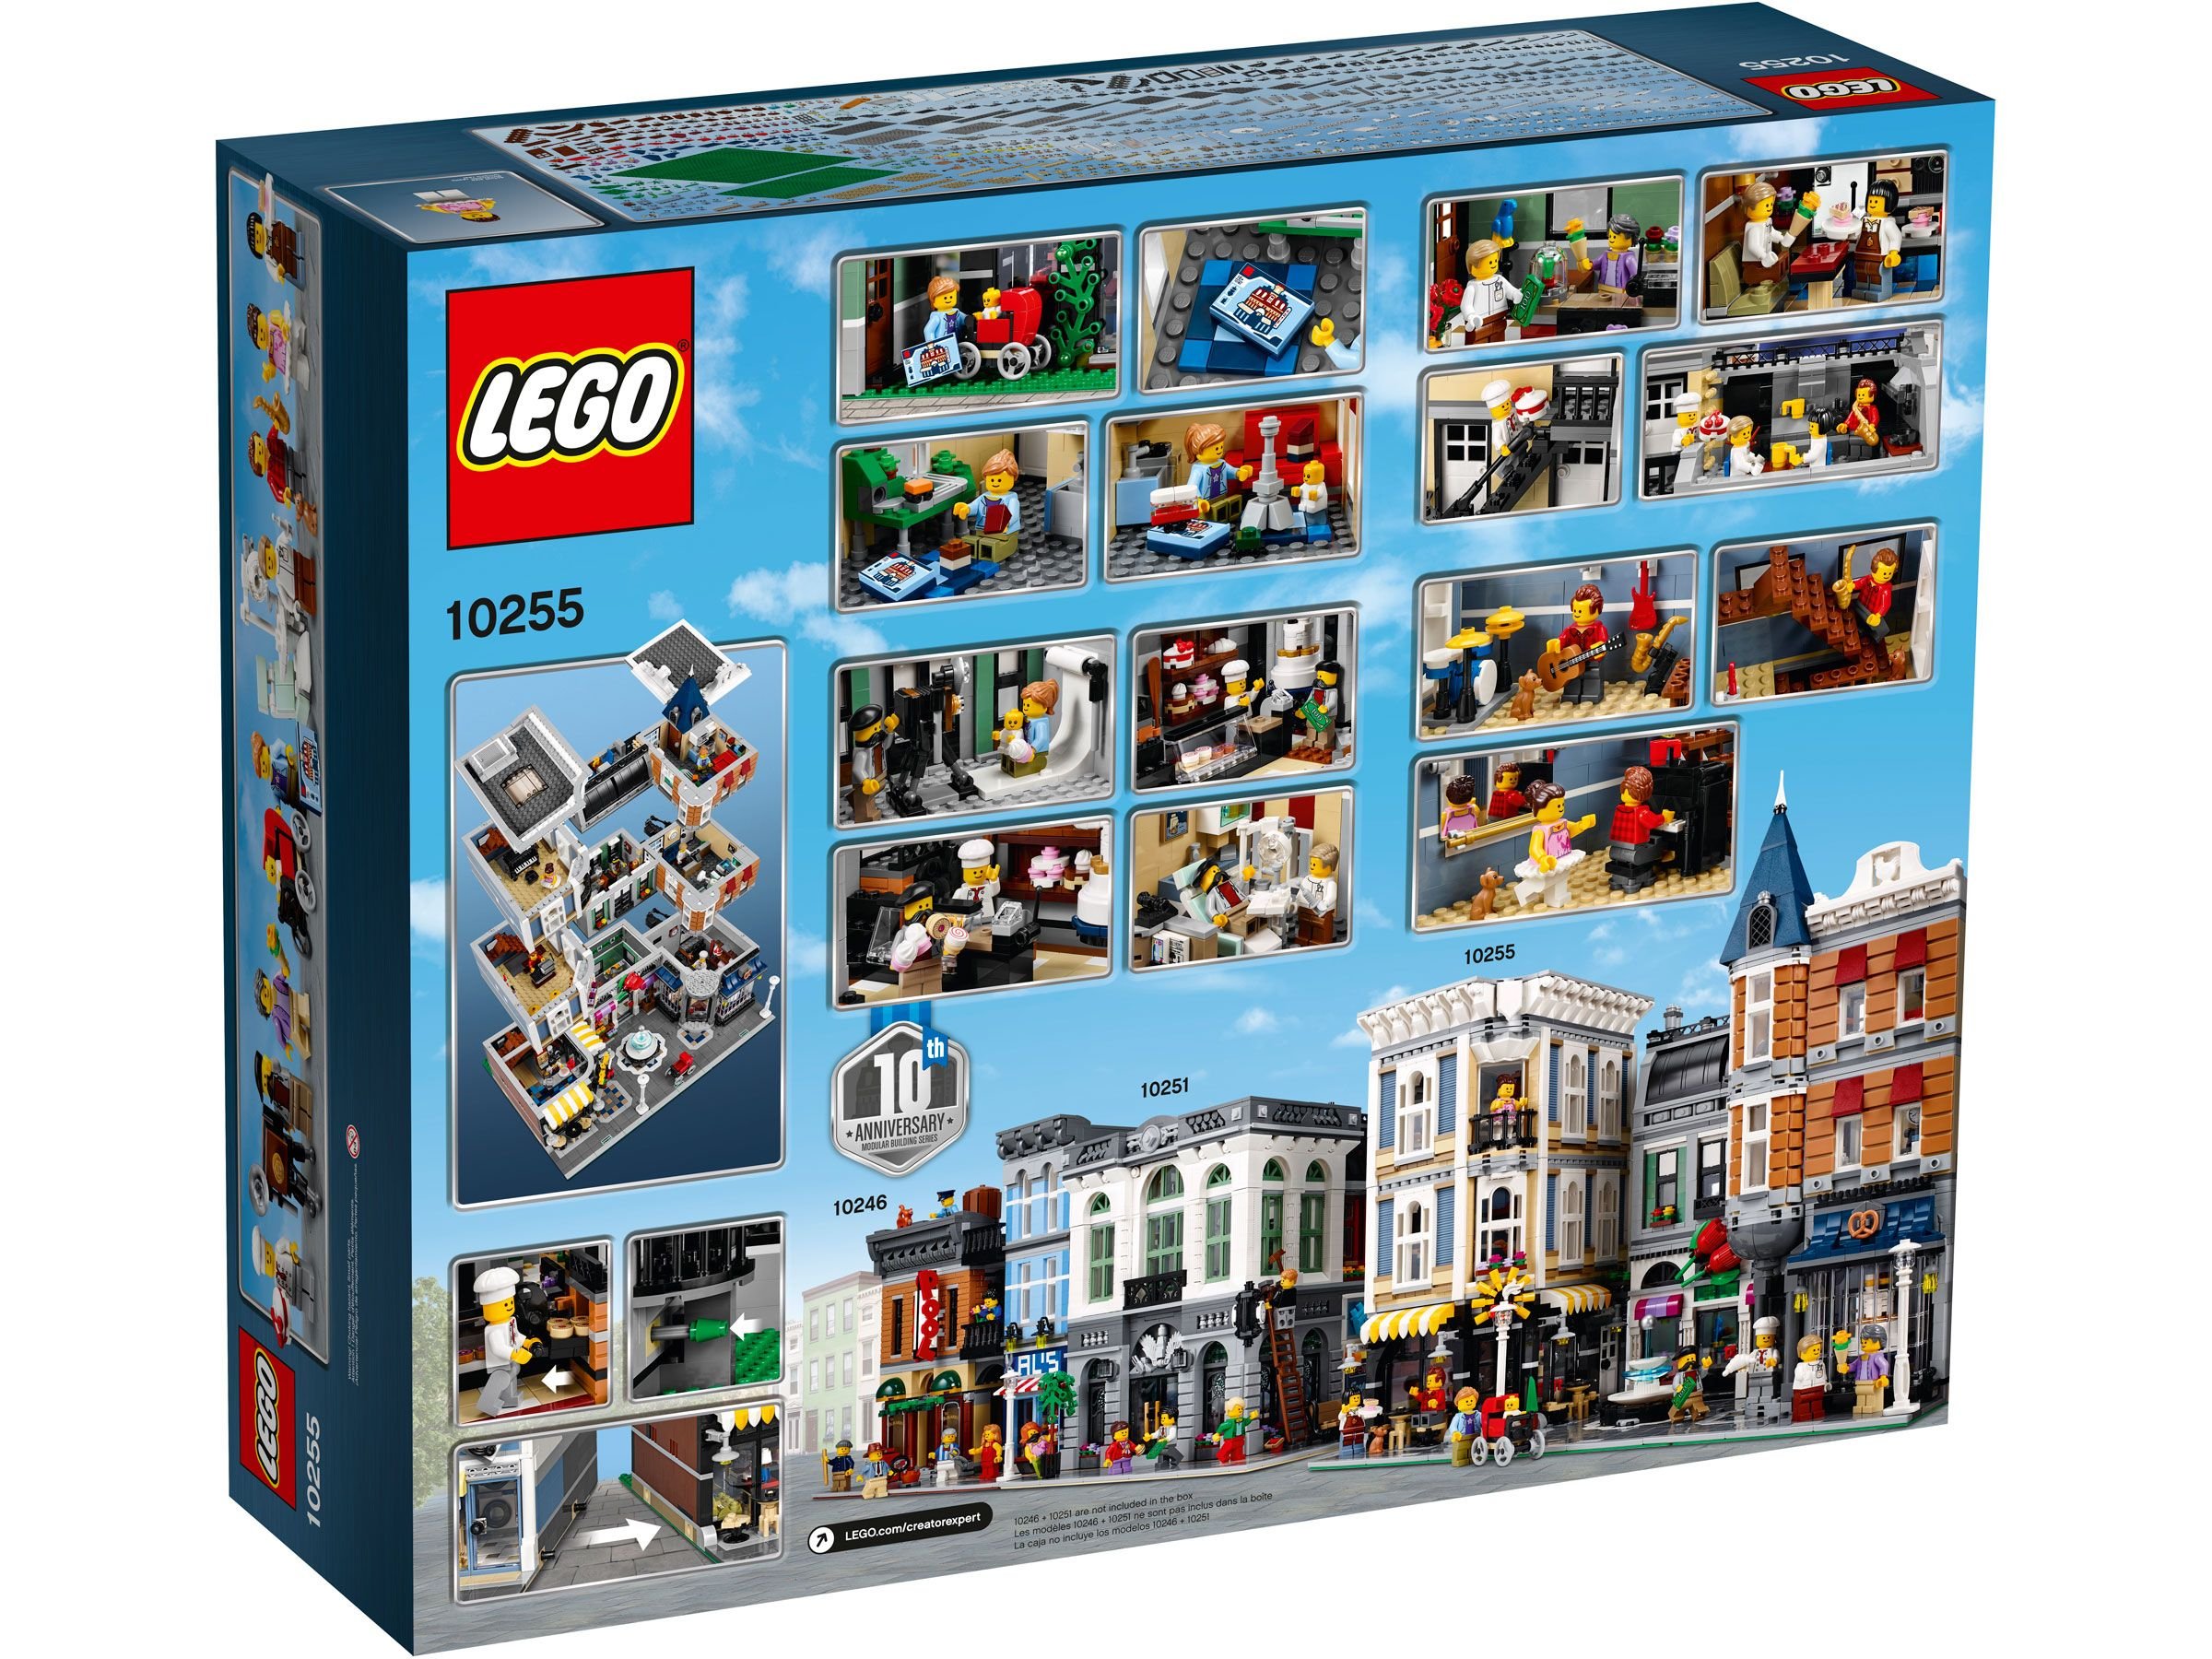 Lego 10255 Creator Expert Assembly Square 